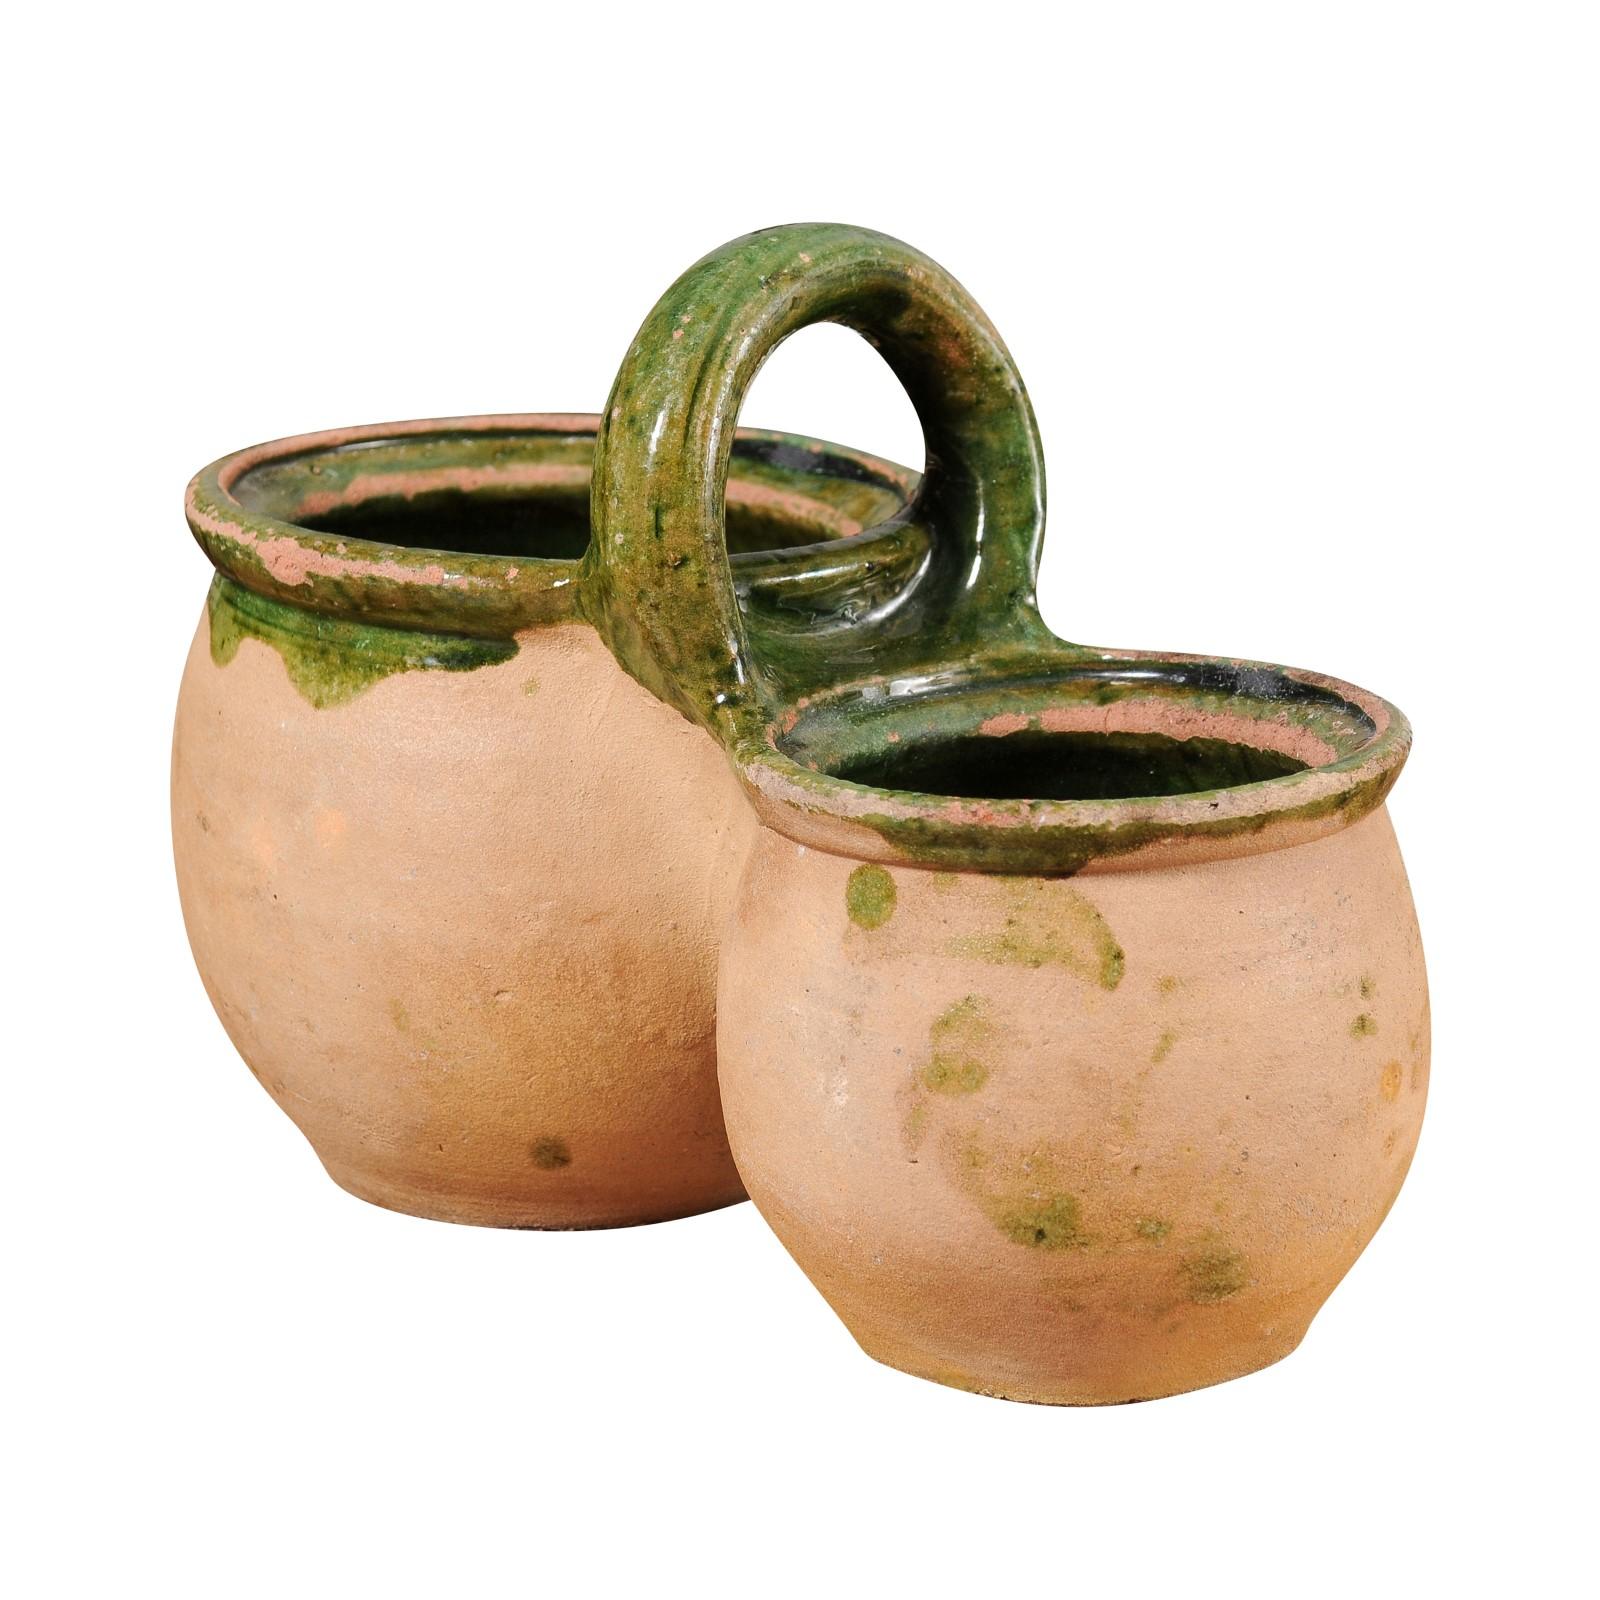 A French pottery shepherd's lunch holder from the 19th century with green glaze, two bowls and large handle. This 19th-century French pottery shepherd's lunch holder, known as a 